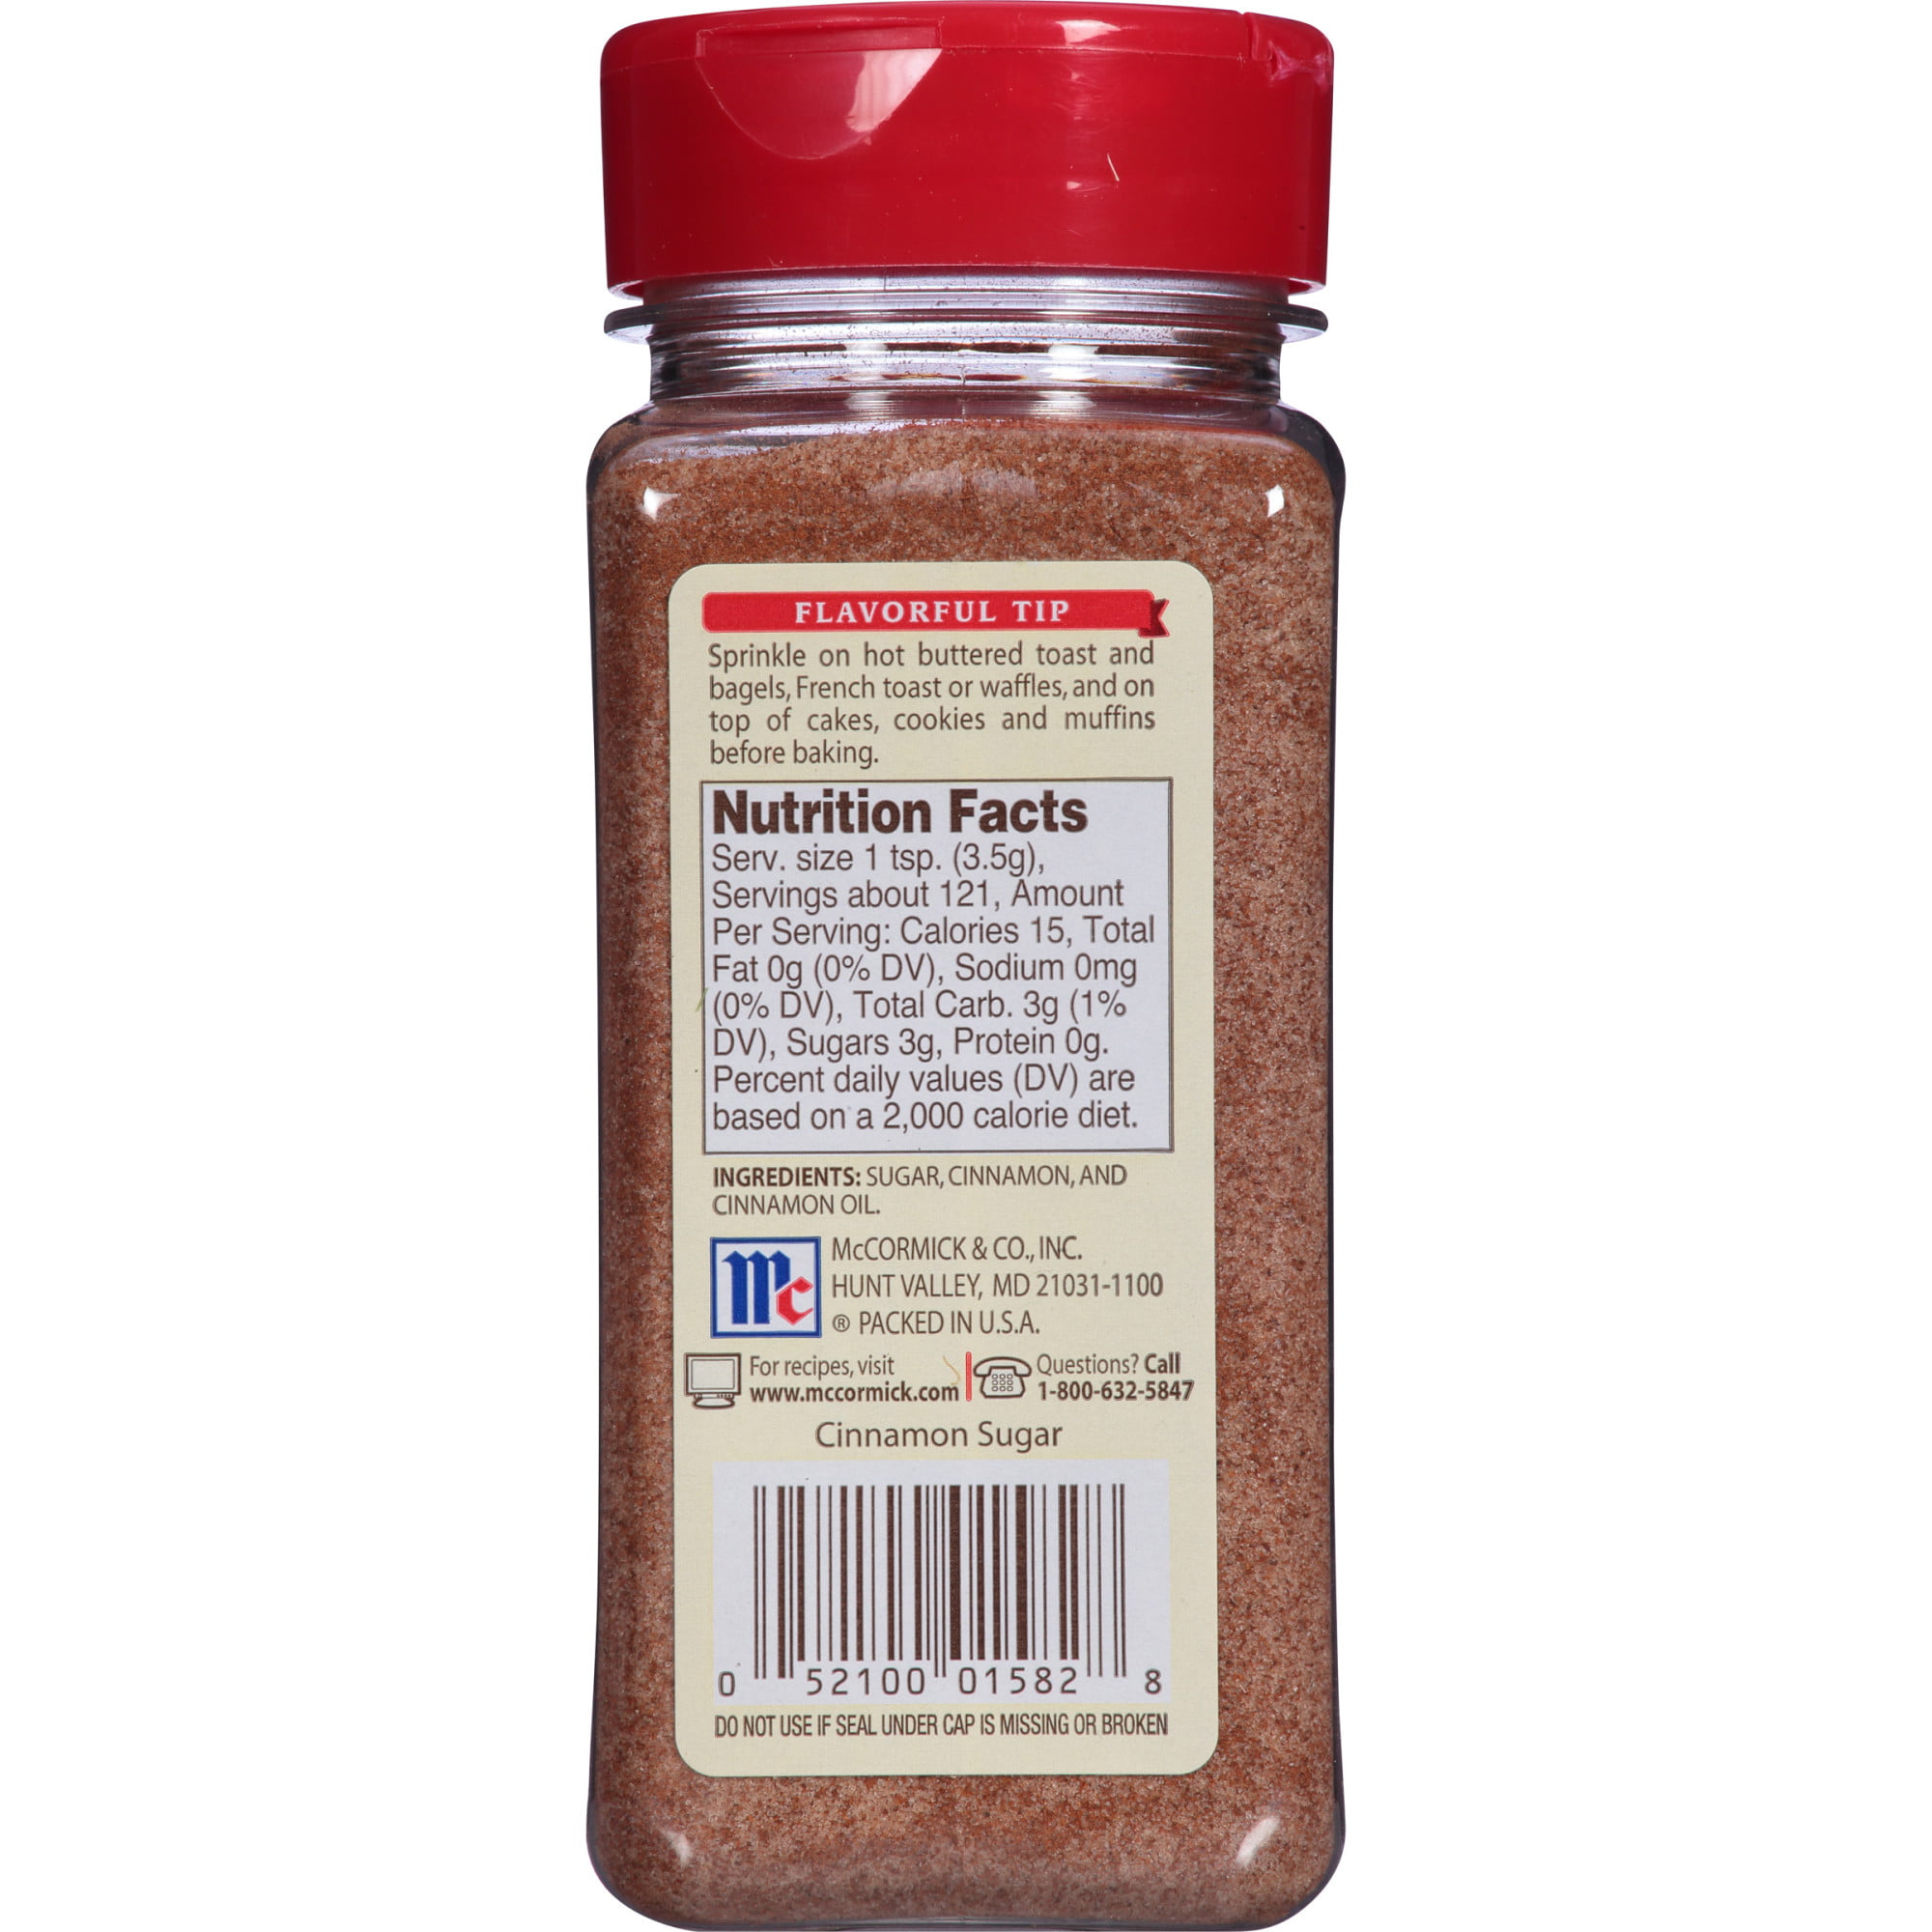 Mccormick Spice Labels Printable All information about healthy